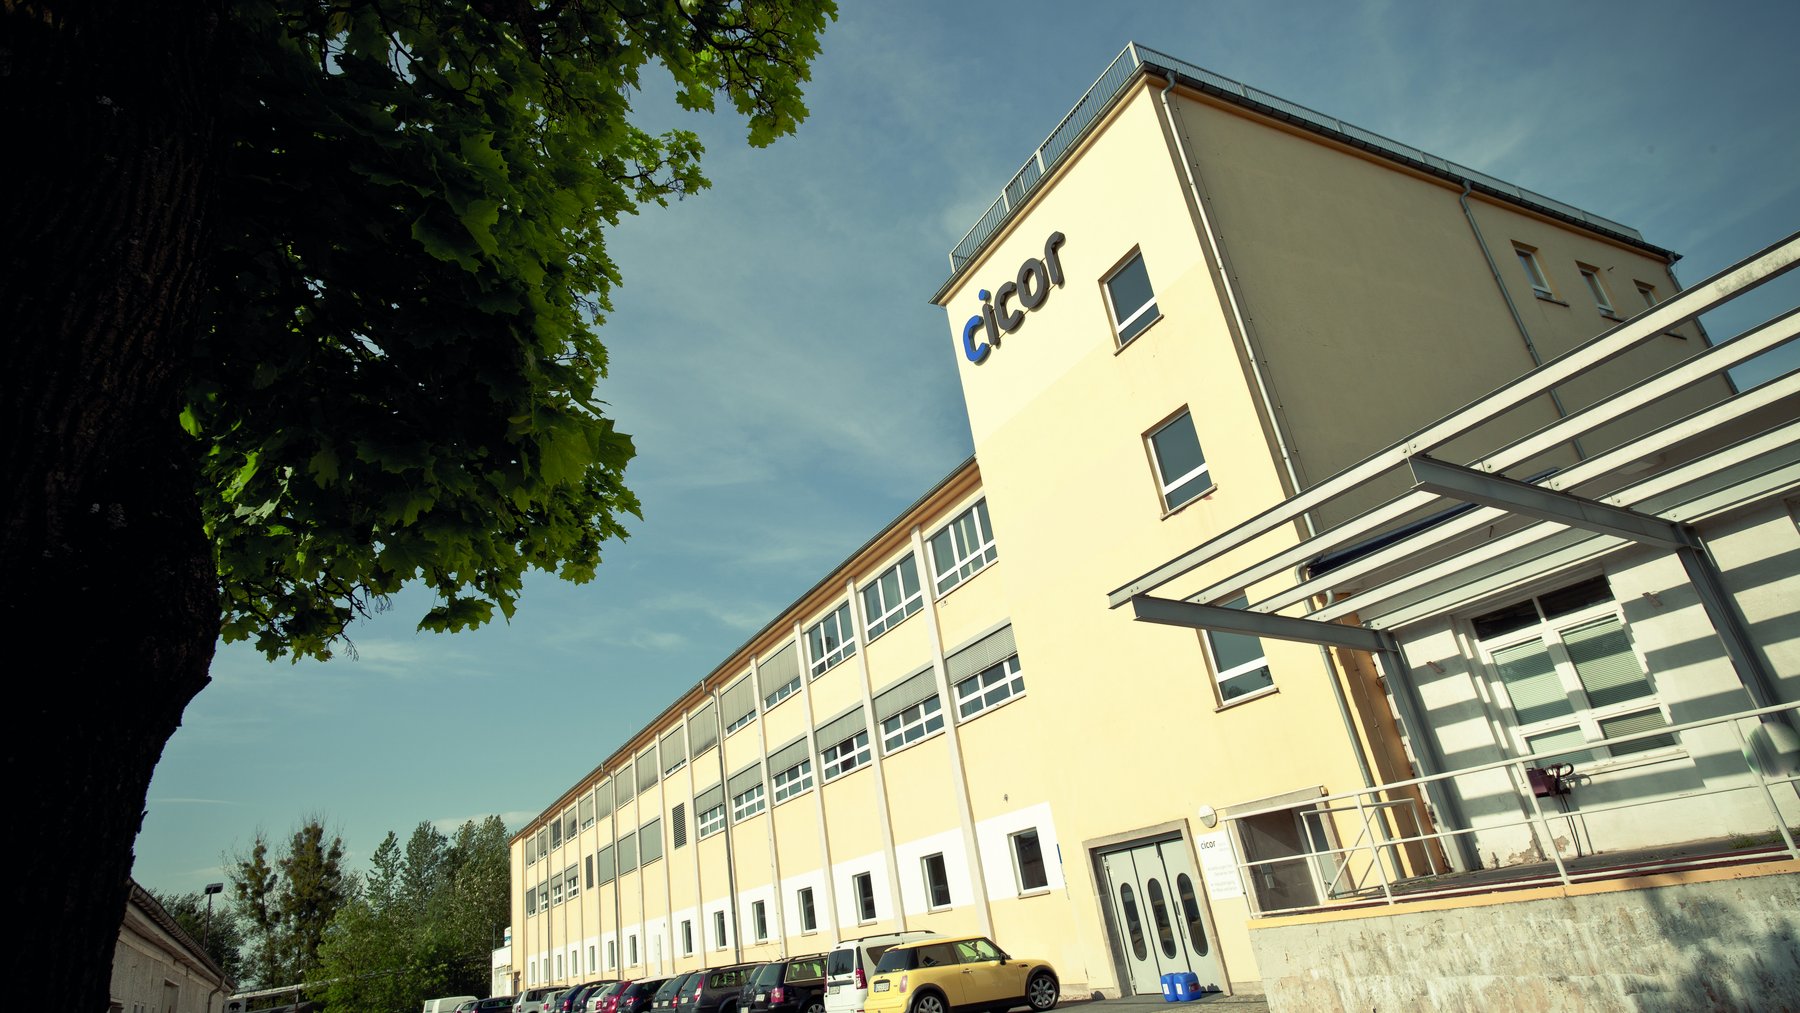 Cicor production site in Radeberg, Germany